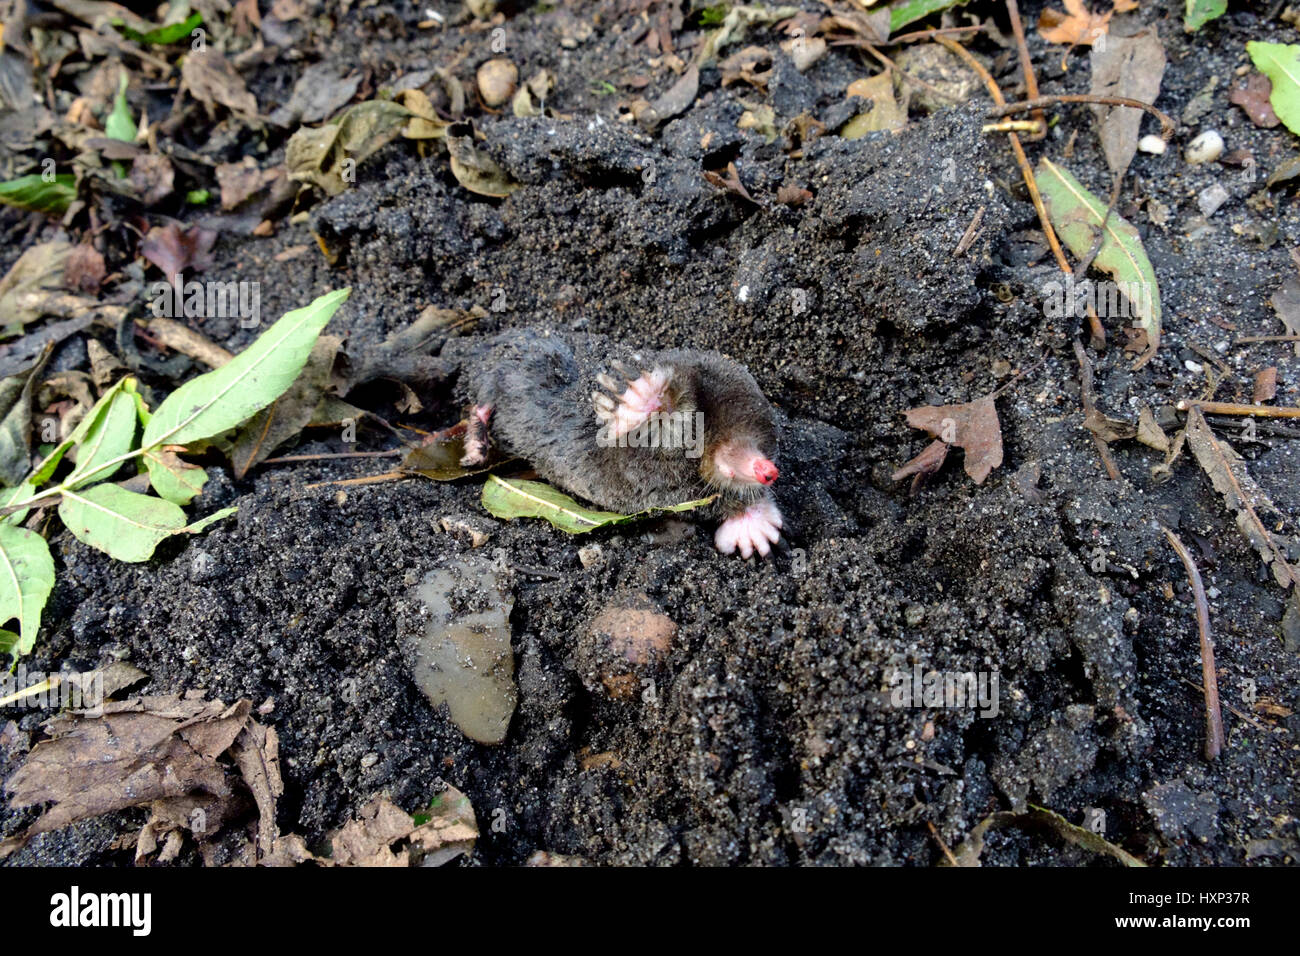 A mole on the surface in the English countryside Stock Photo